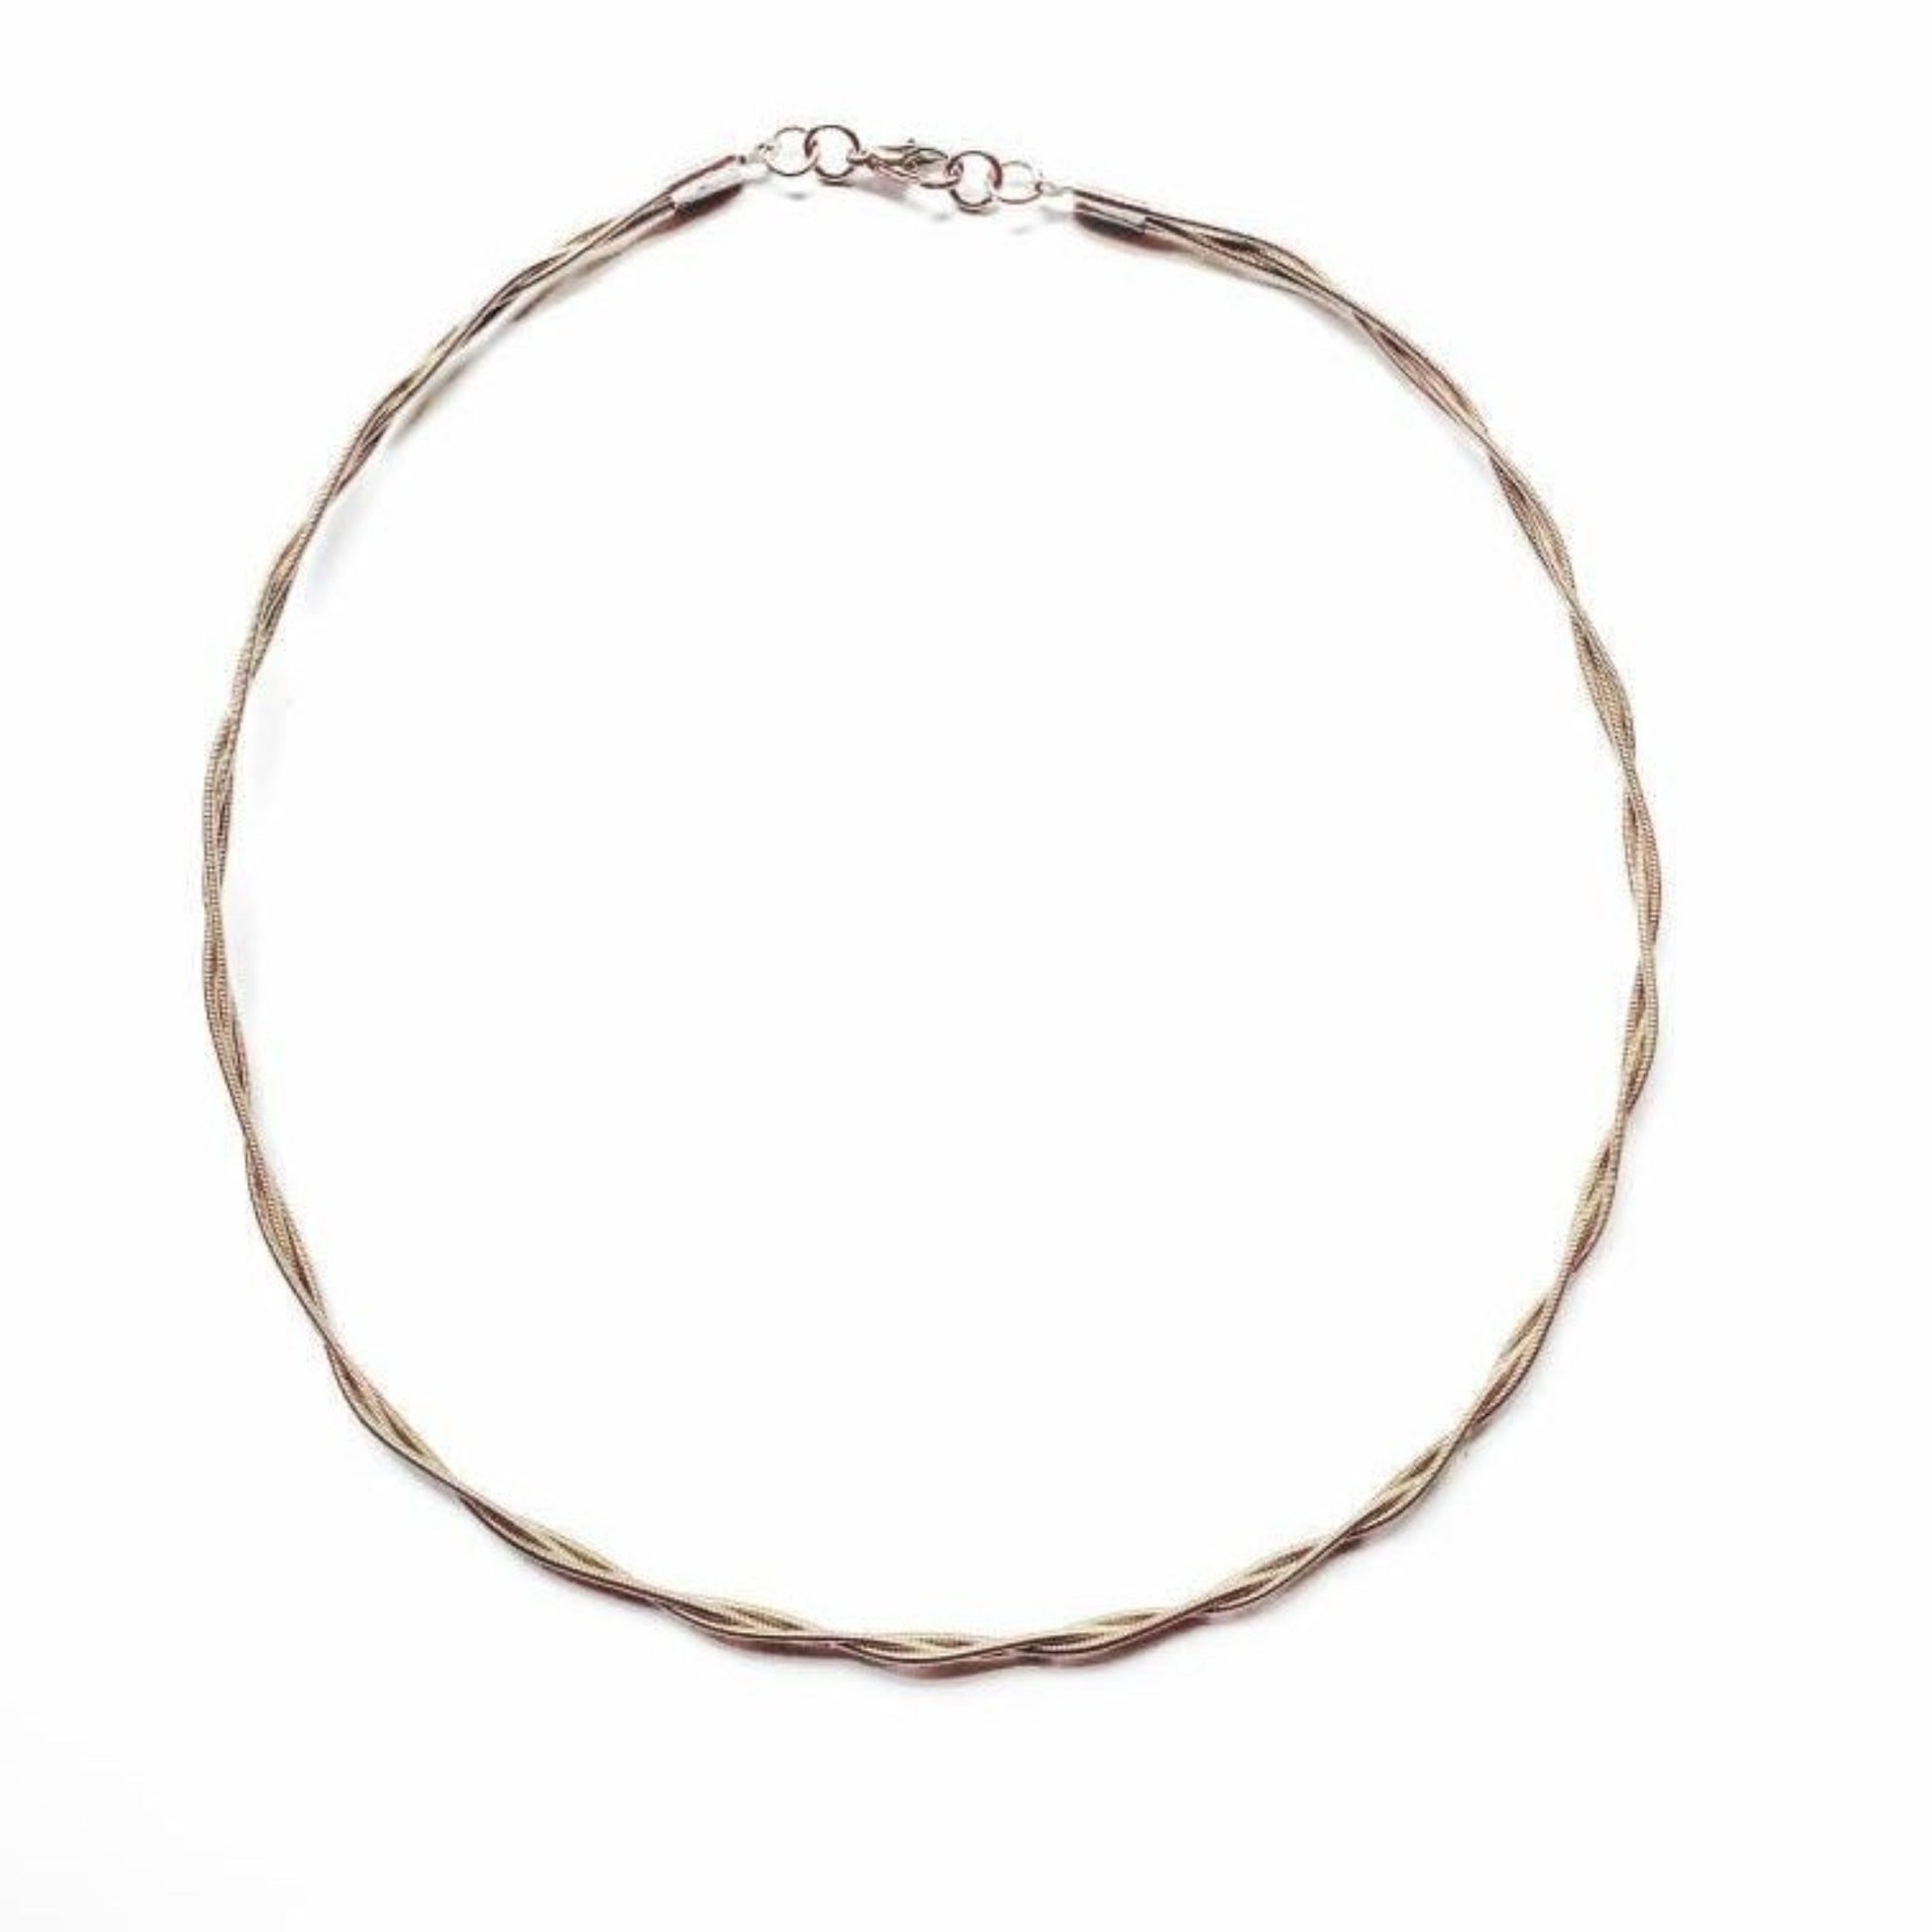 a silver chain style necklace from from braided guitar strings